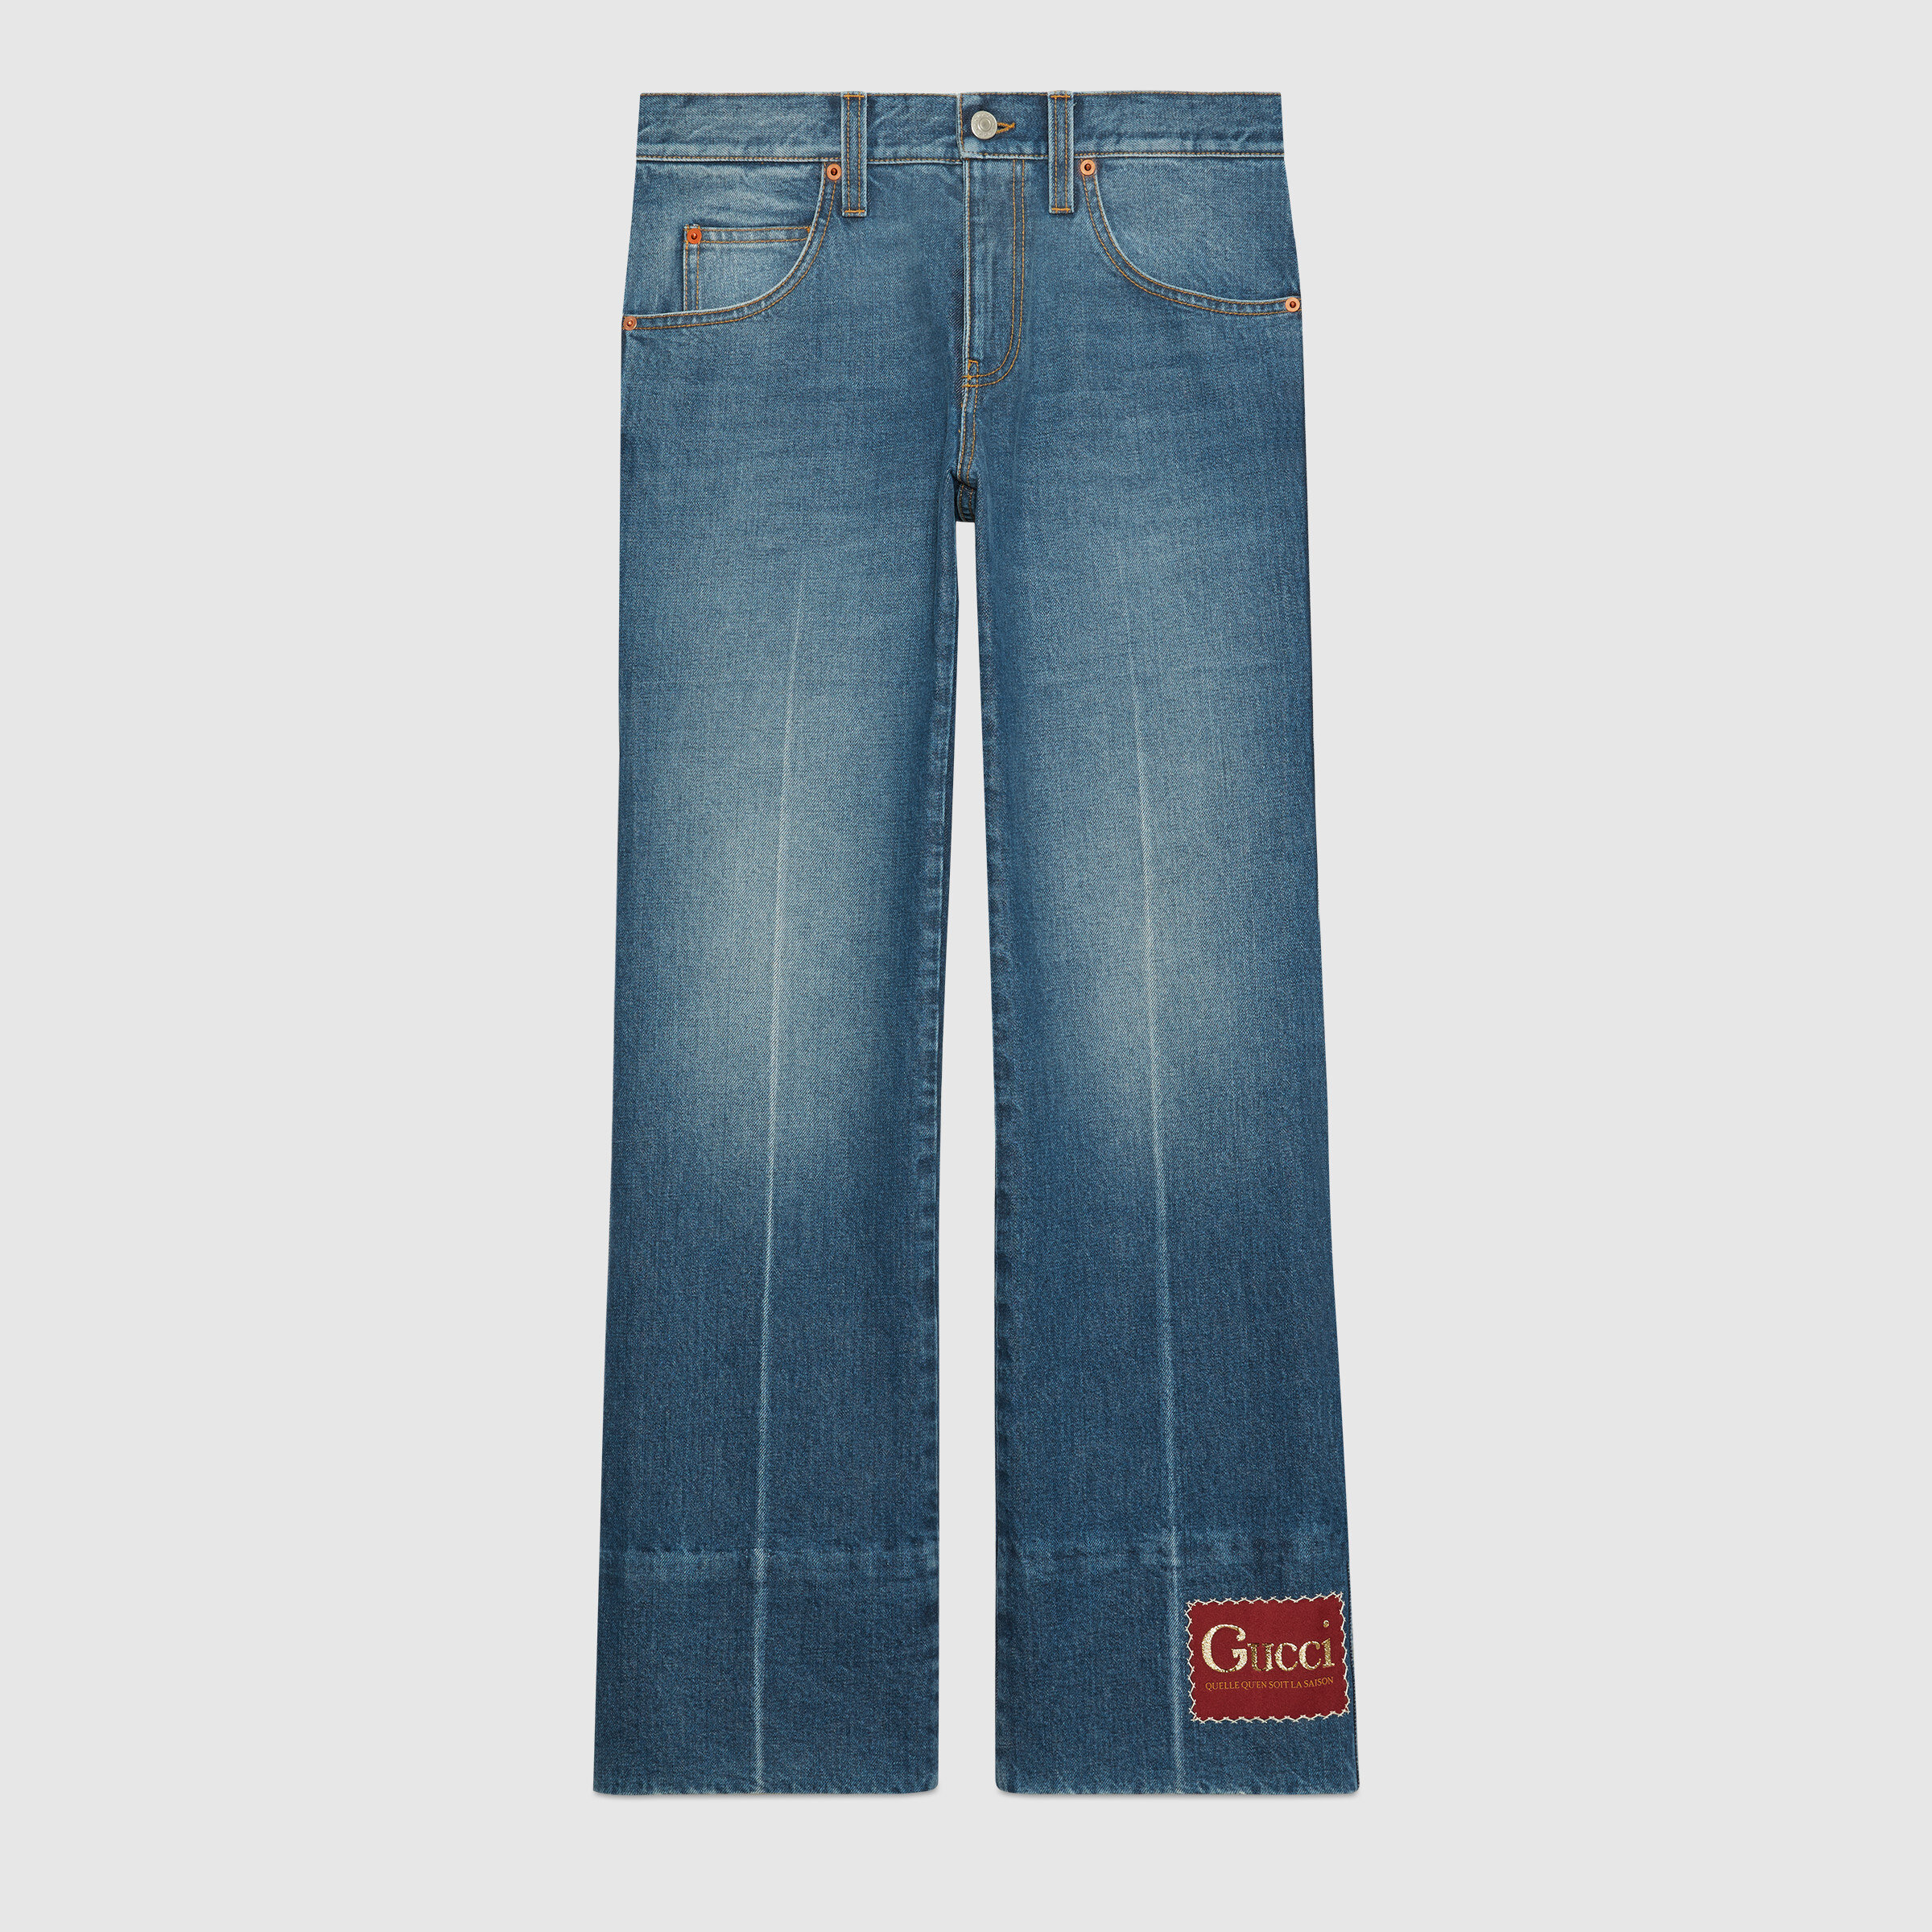 Gucci Marble washed denim flare pant.jpg